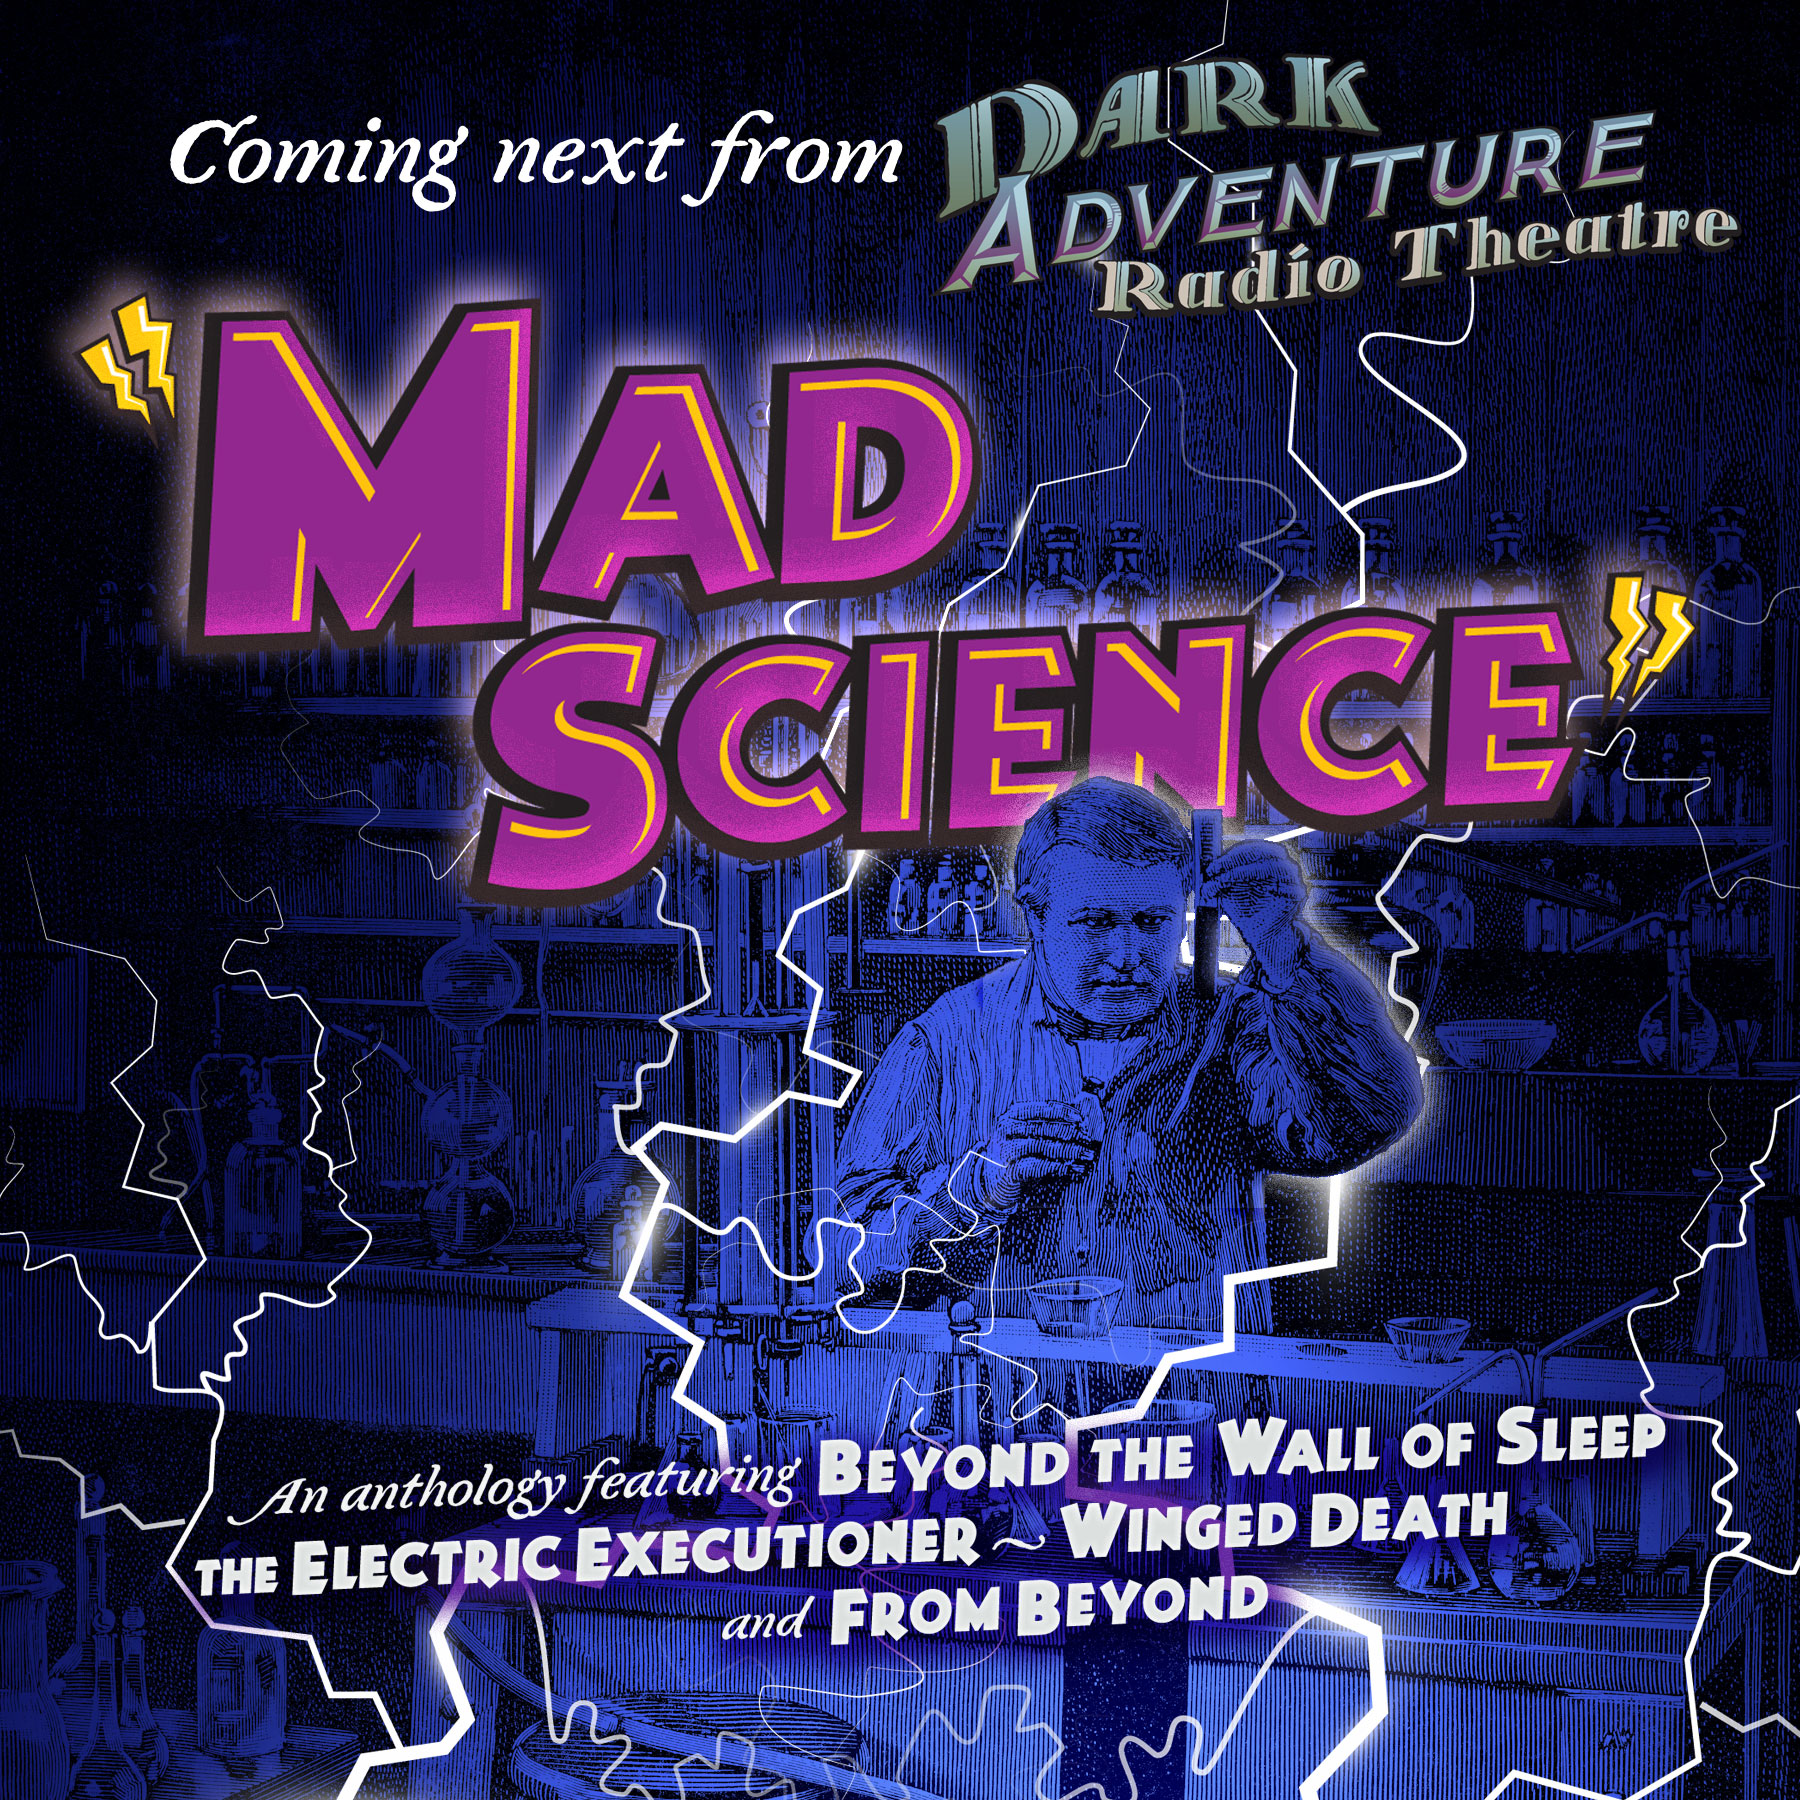 Mad Science